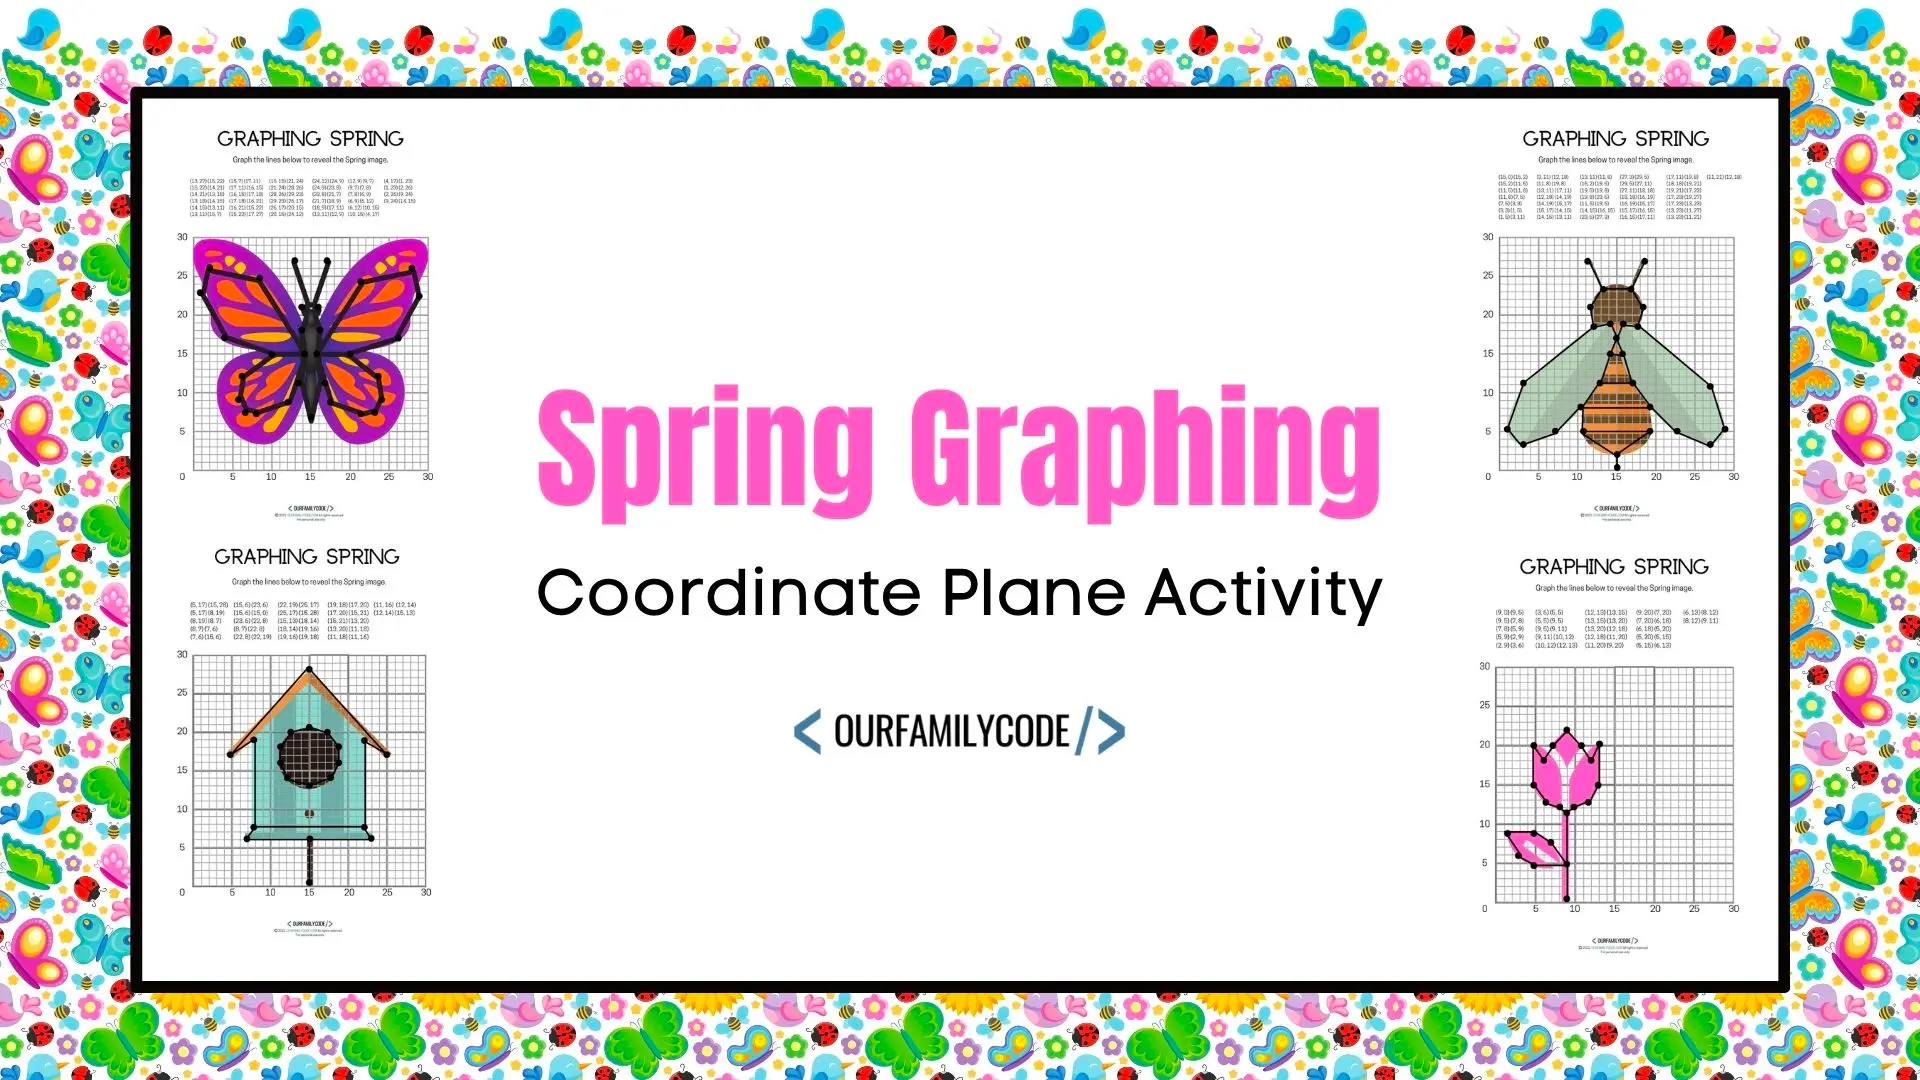 A picture of four spring graphing worksheets including a butterfly, bee, birdhouse, and flower on a white background with text that reads "Spring Graphing coordinate plane activity".